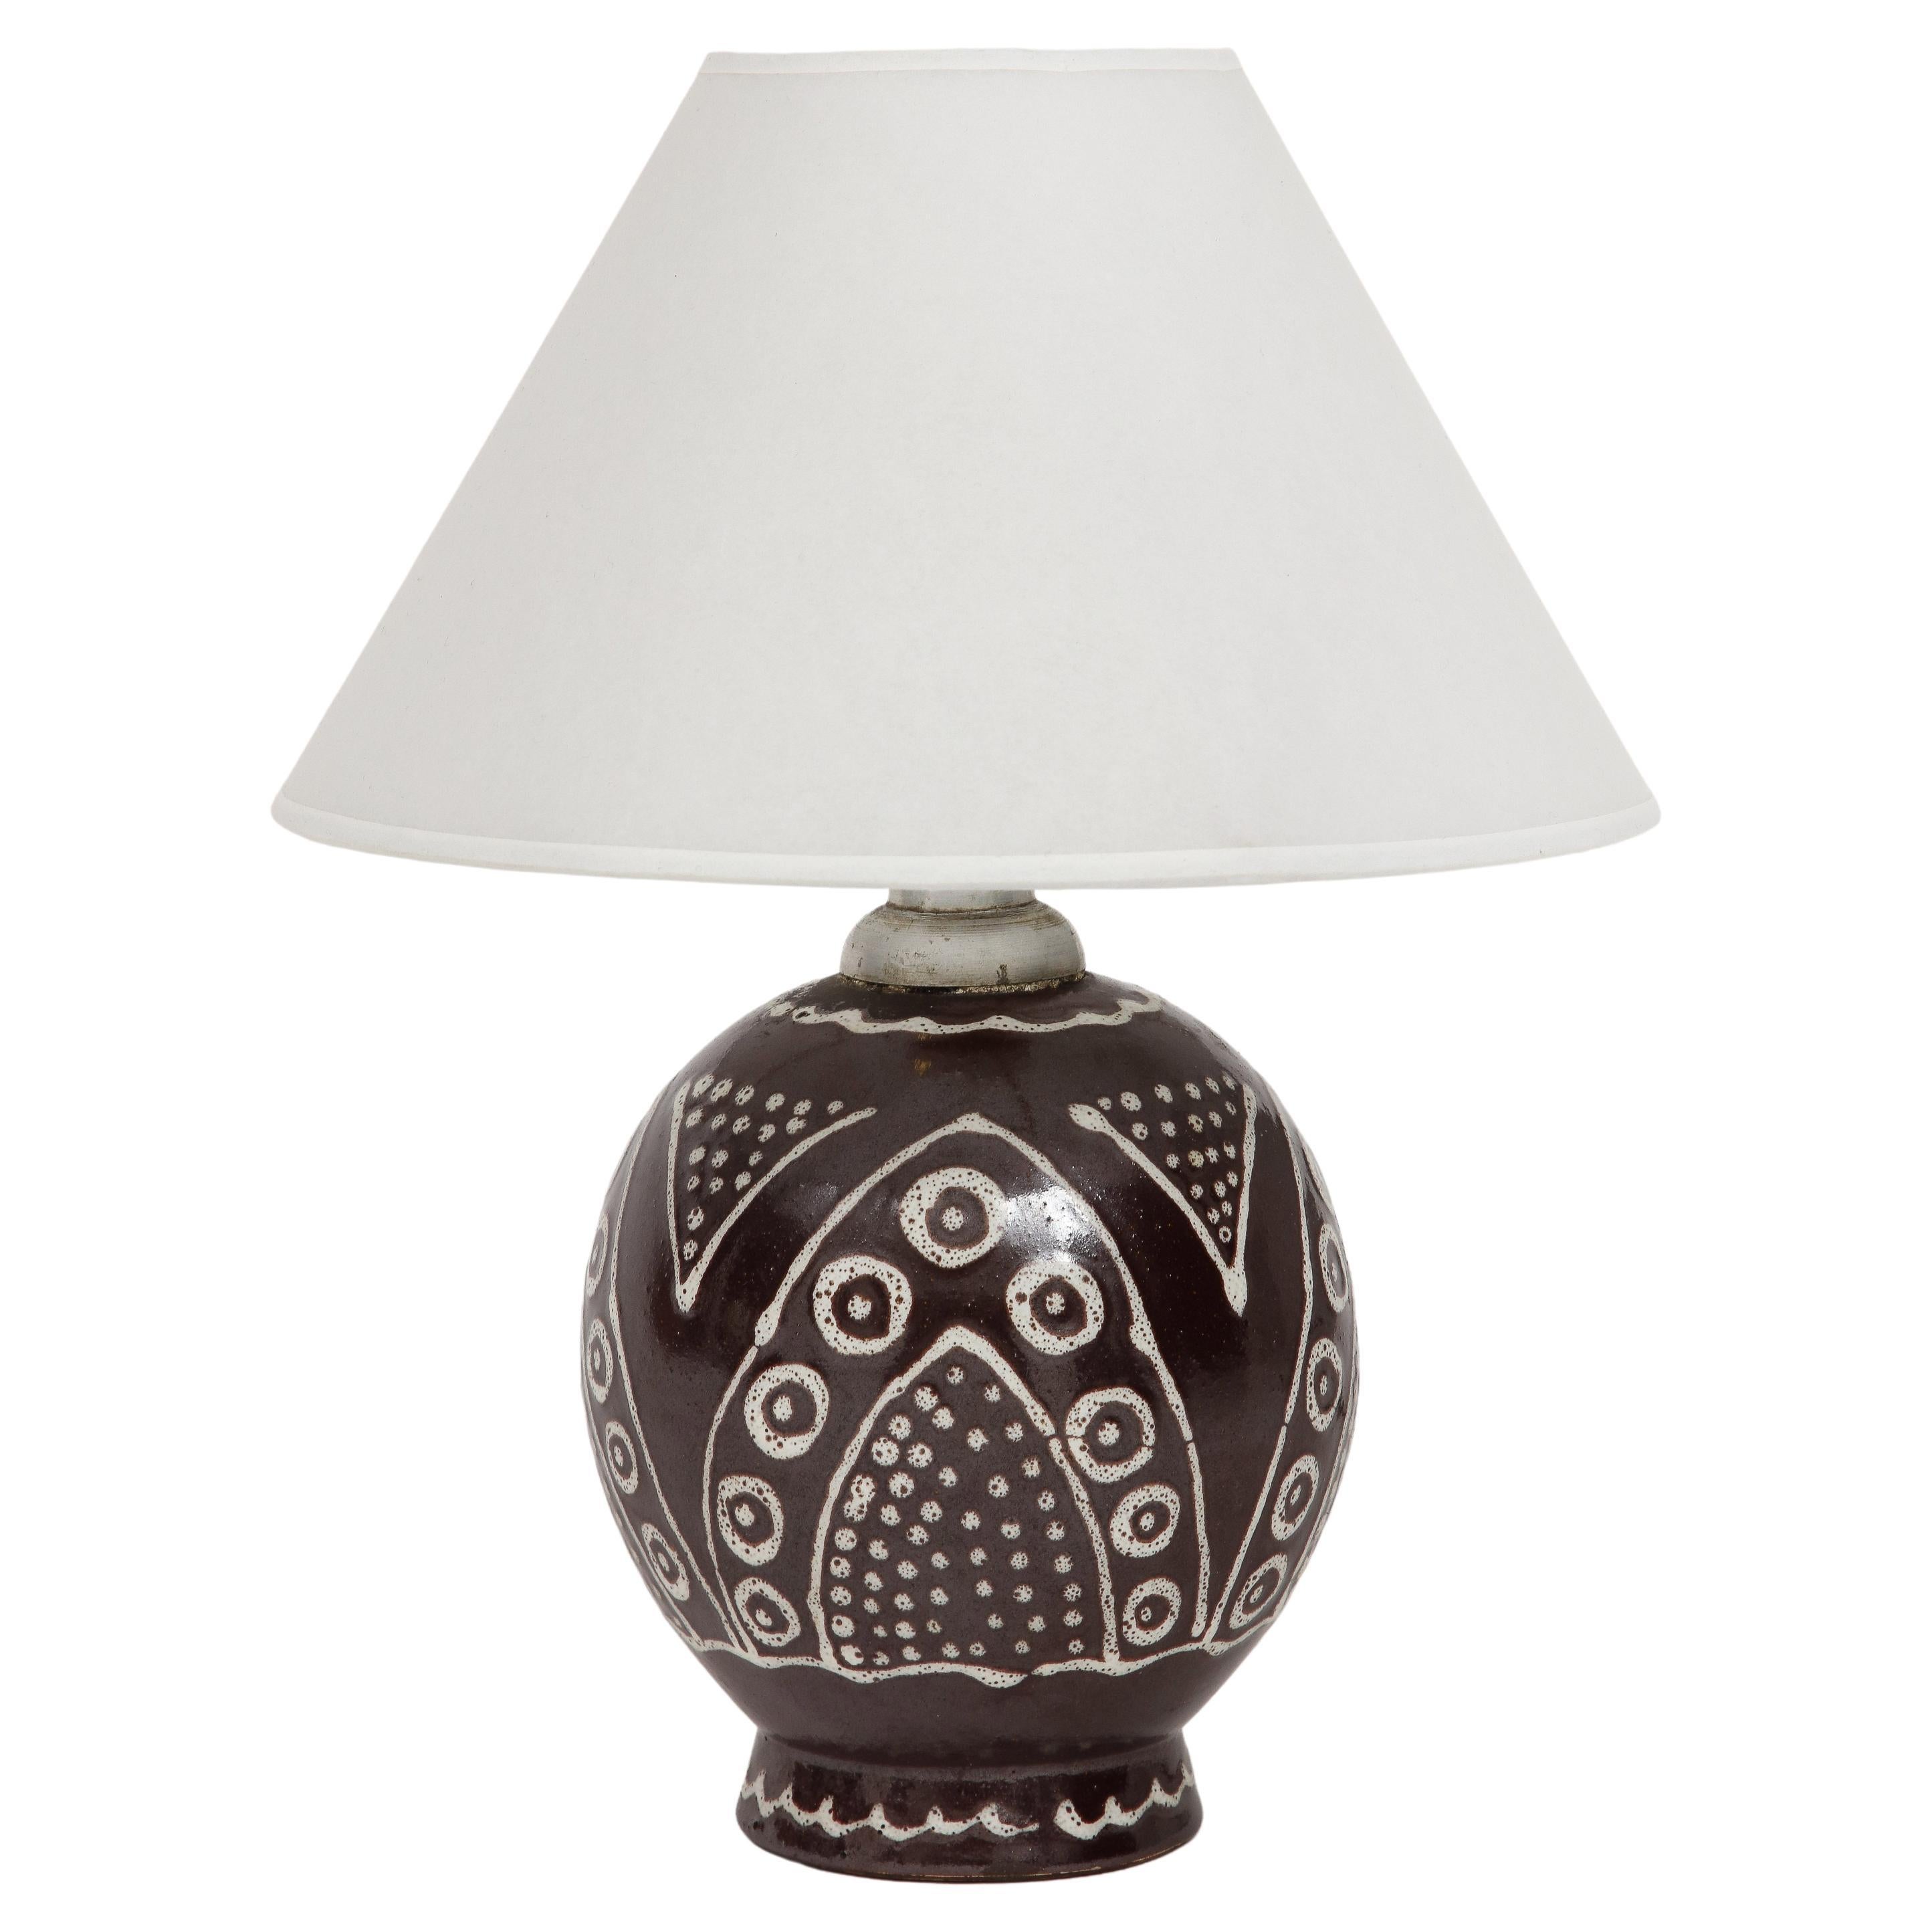 French Brown Ceramic Lamp, White Glazed Design, C. 1930, Numbered & Inscribed